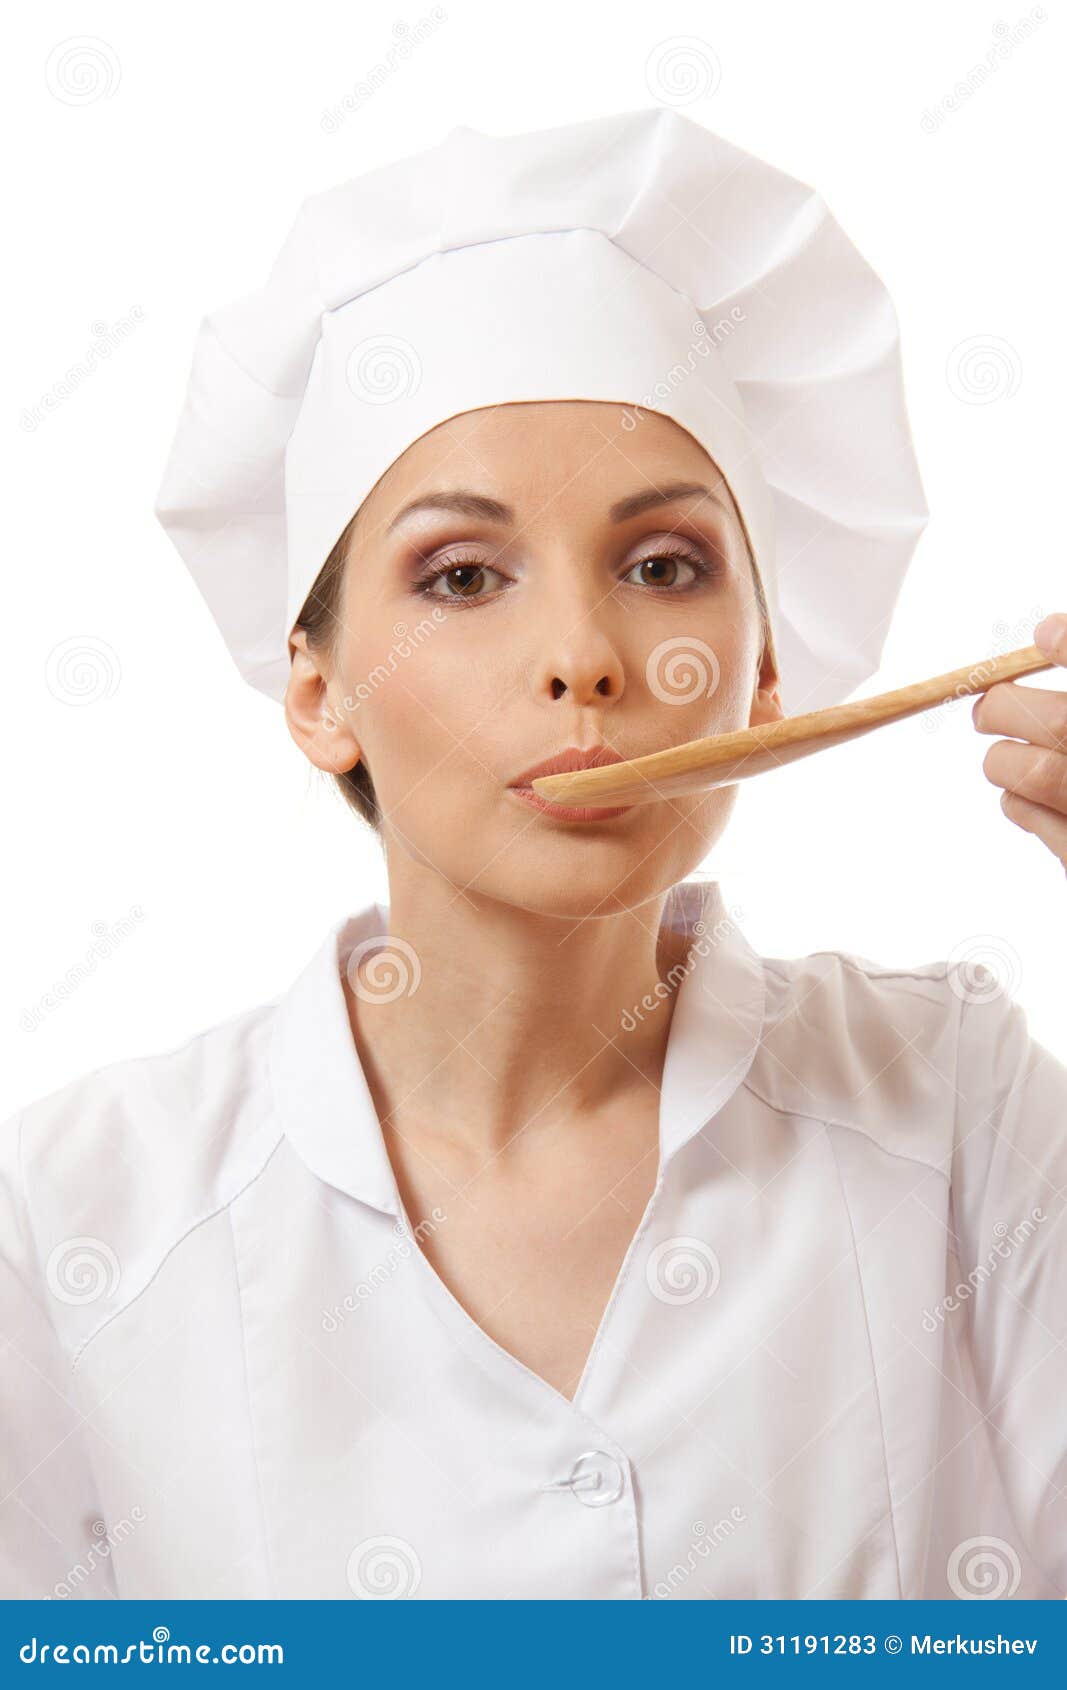 Woman Cook Eating With Spoon, Isolated On White Stock Image - Image of ...